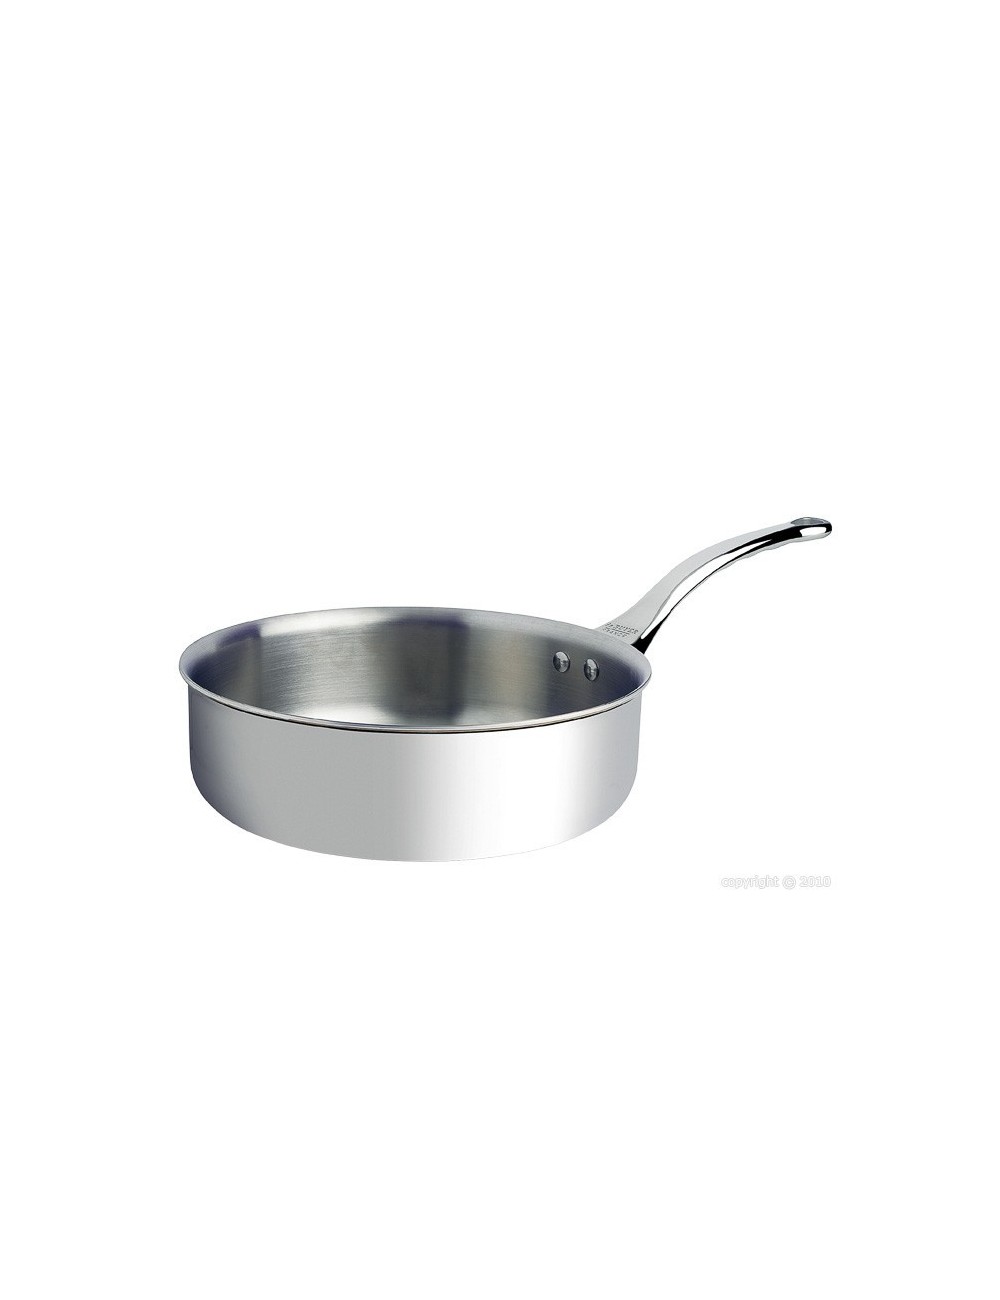 de BUYER Affinity induction casserole / lid, stainless steel, Ø 24